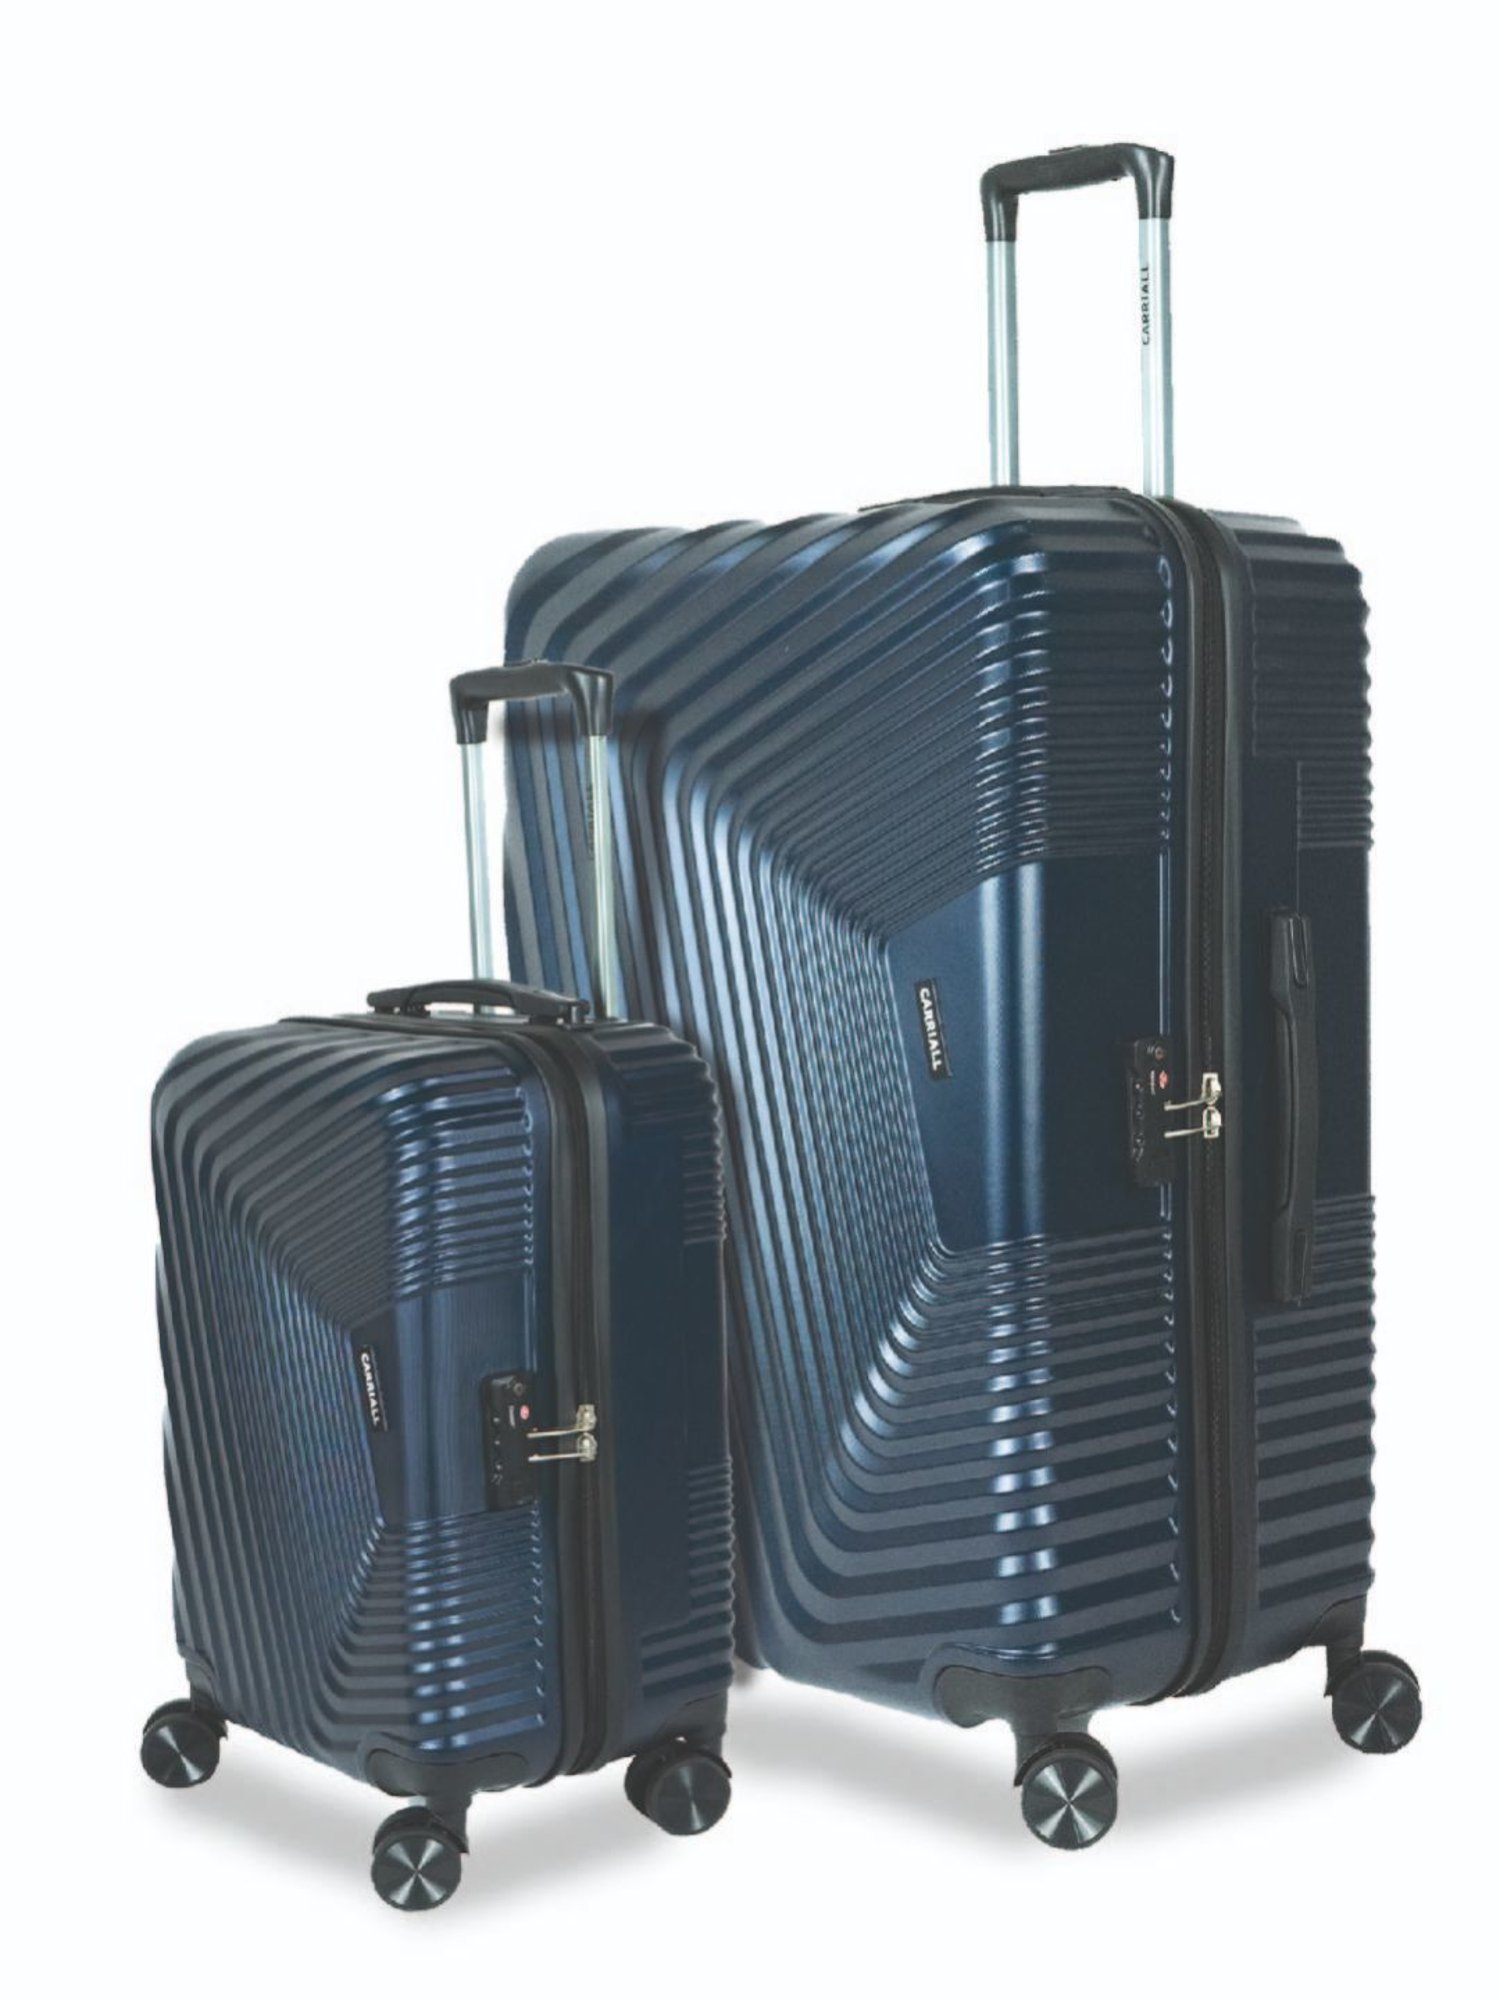 Carriall Groove smart Luggage Check-in Suitcase 8 Wheels - 28 inch Grey -  Price in India | Flipkart.com